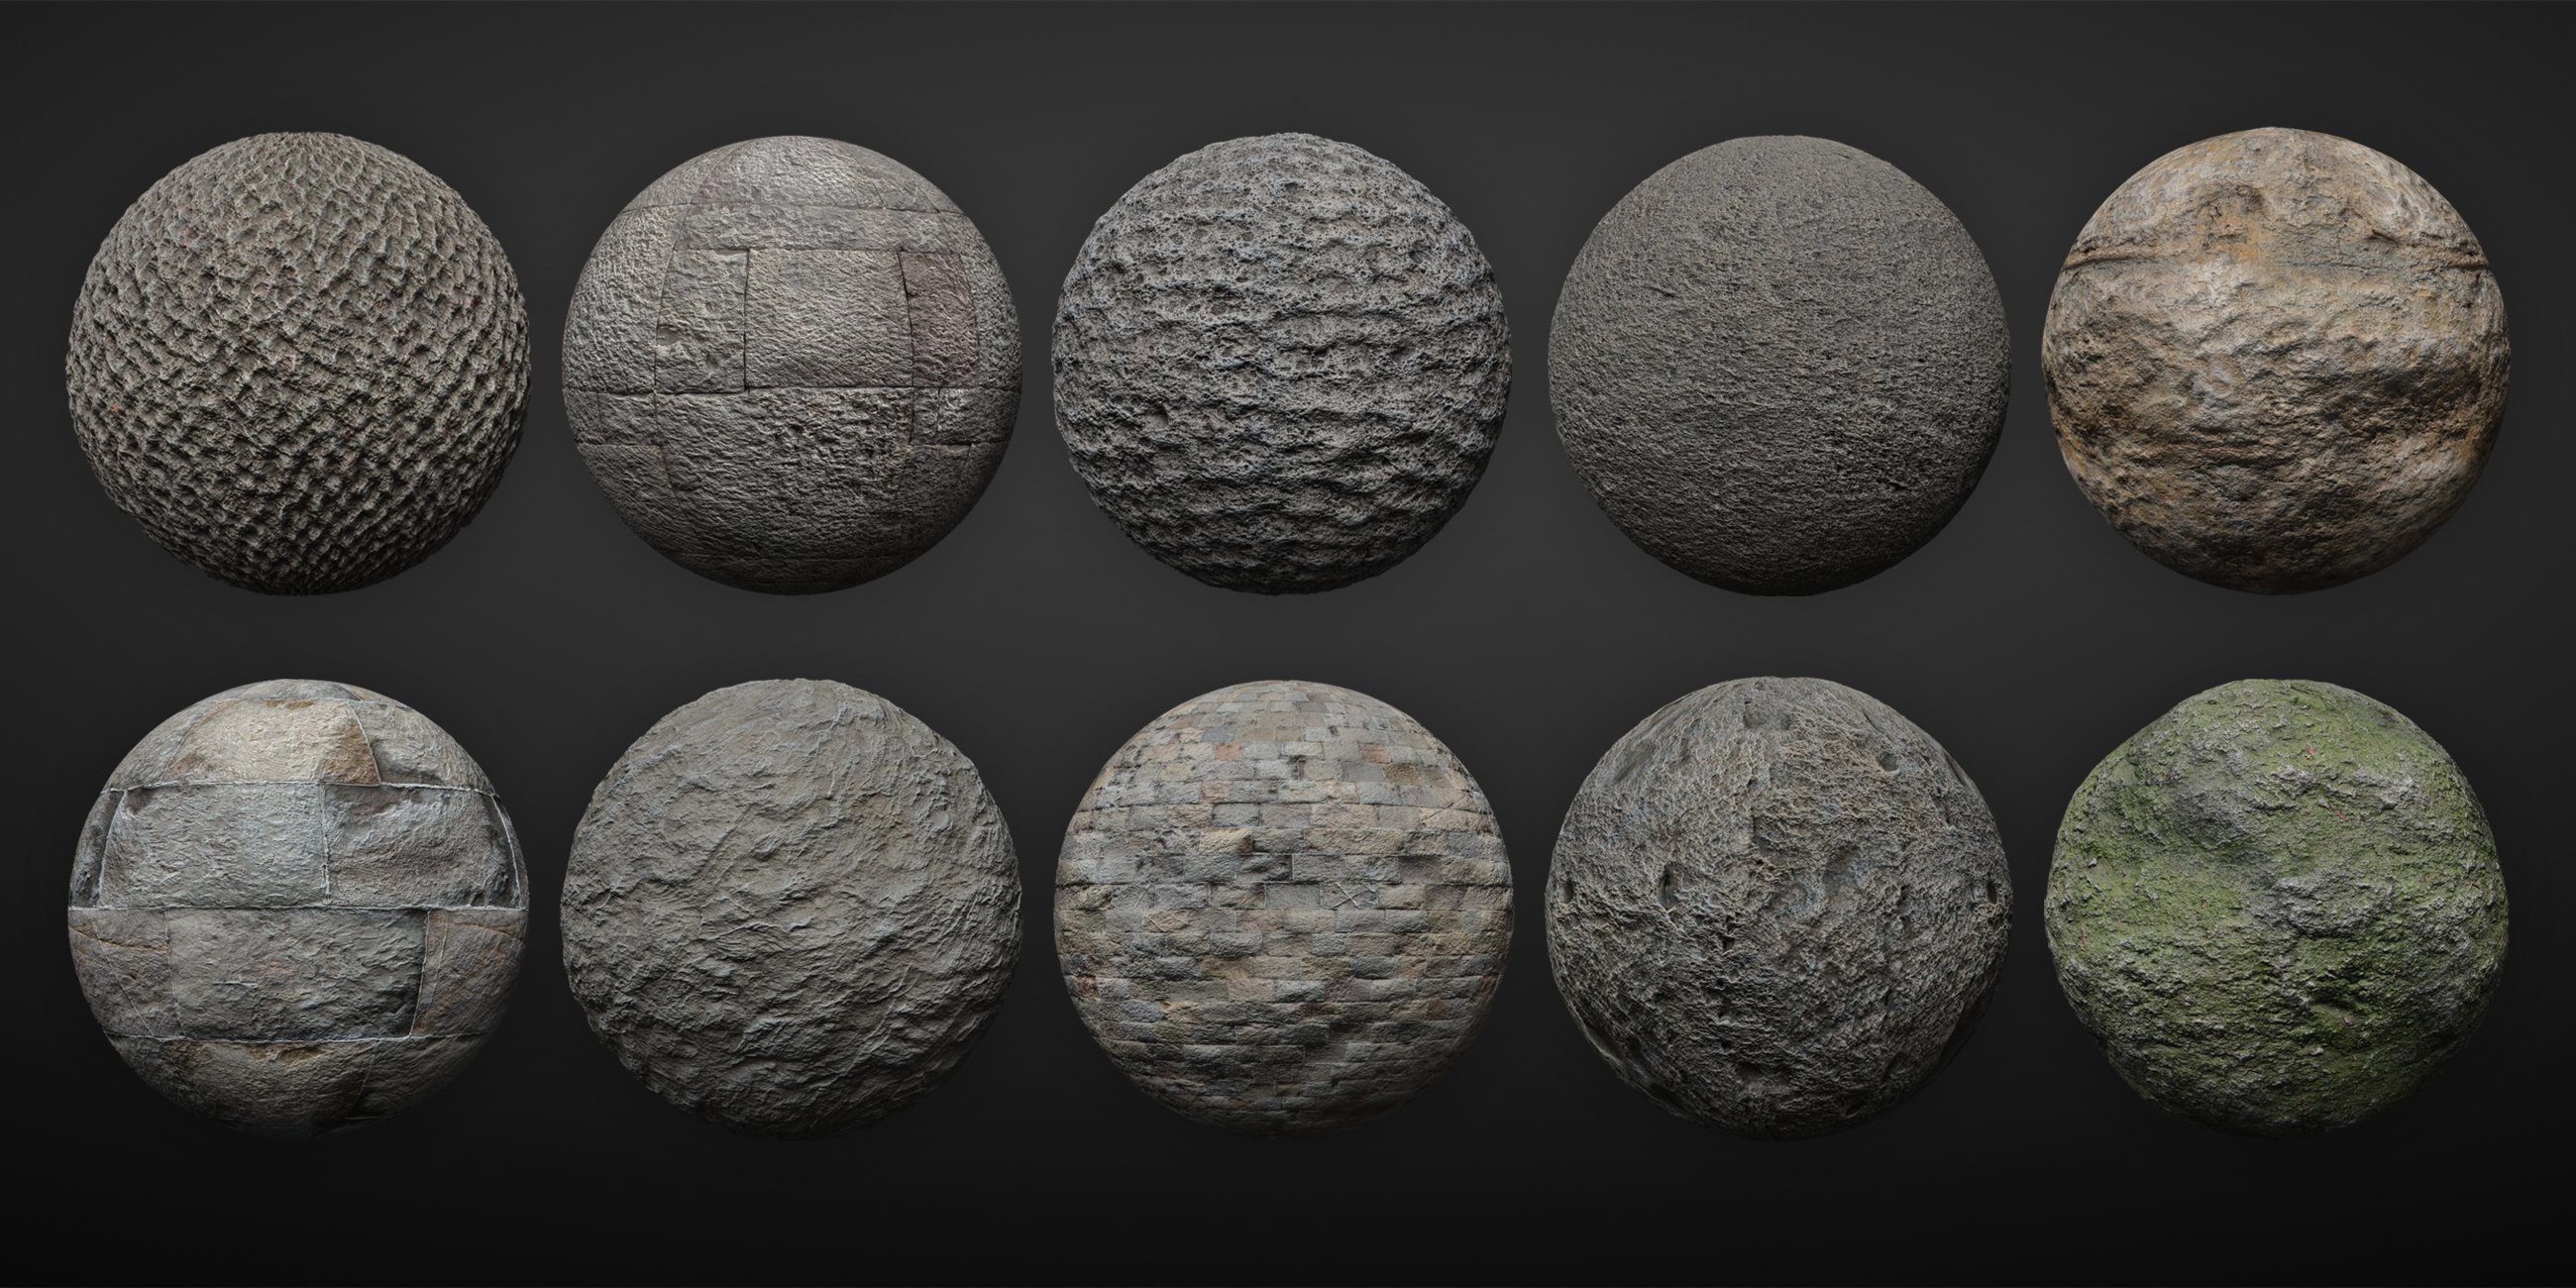 Stoneworks From Mexico 01: Iray Shaders and Merchant Resource by: Soto, 3D Models by Daz 3D